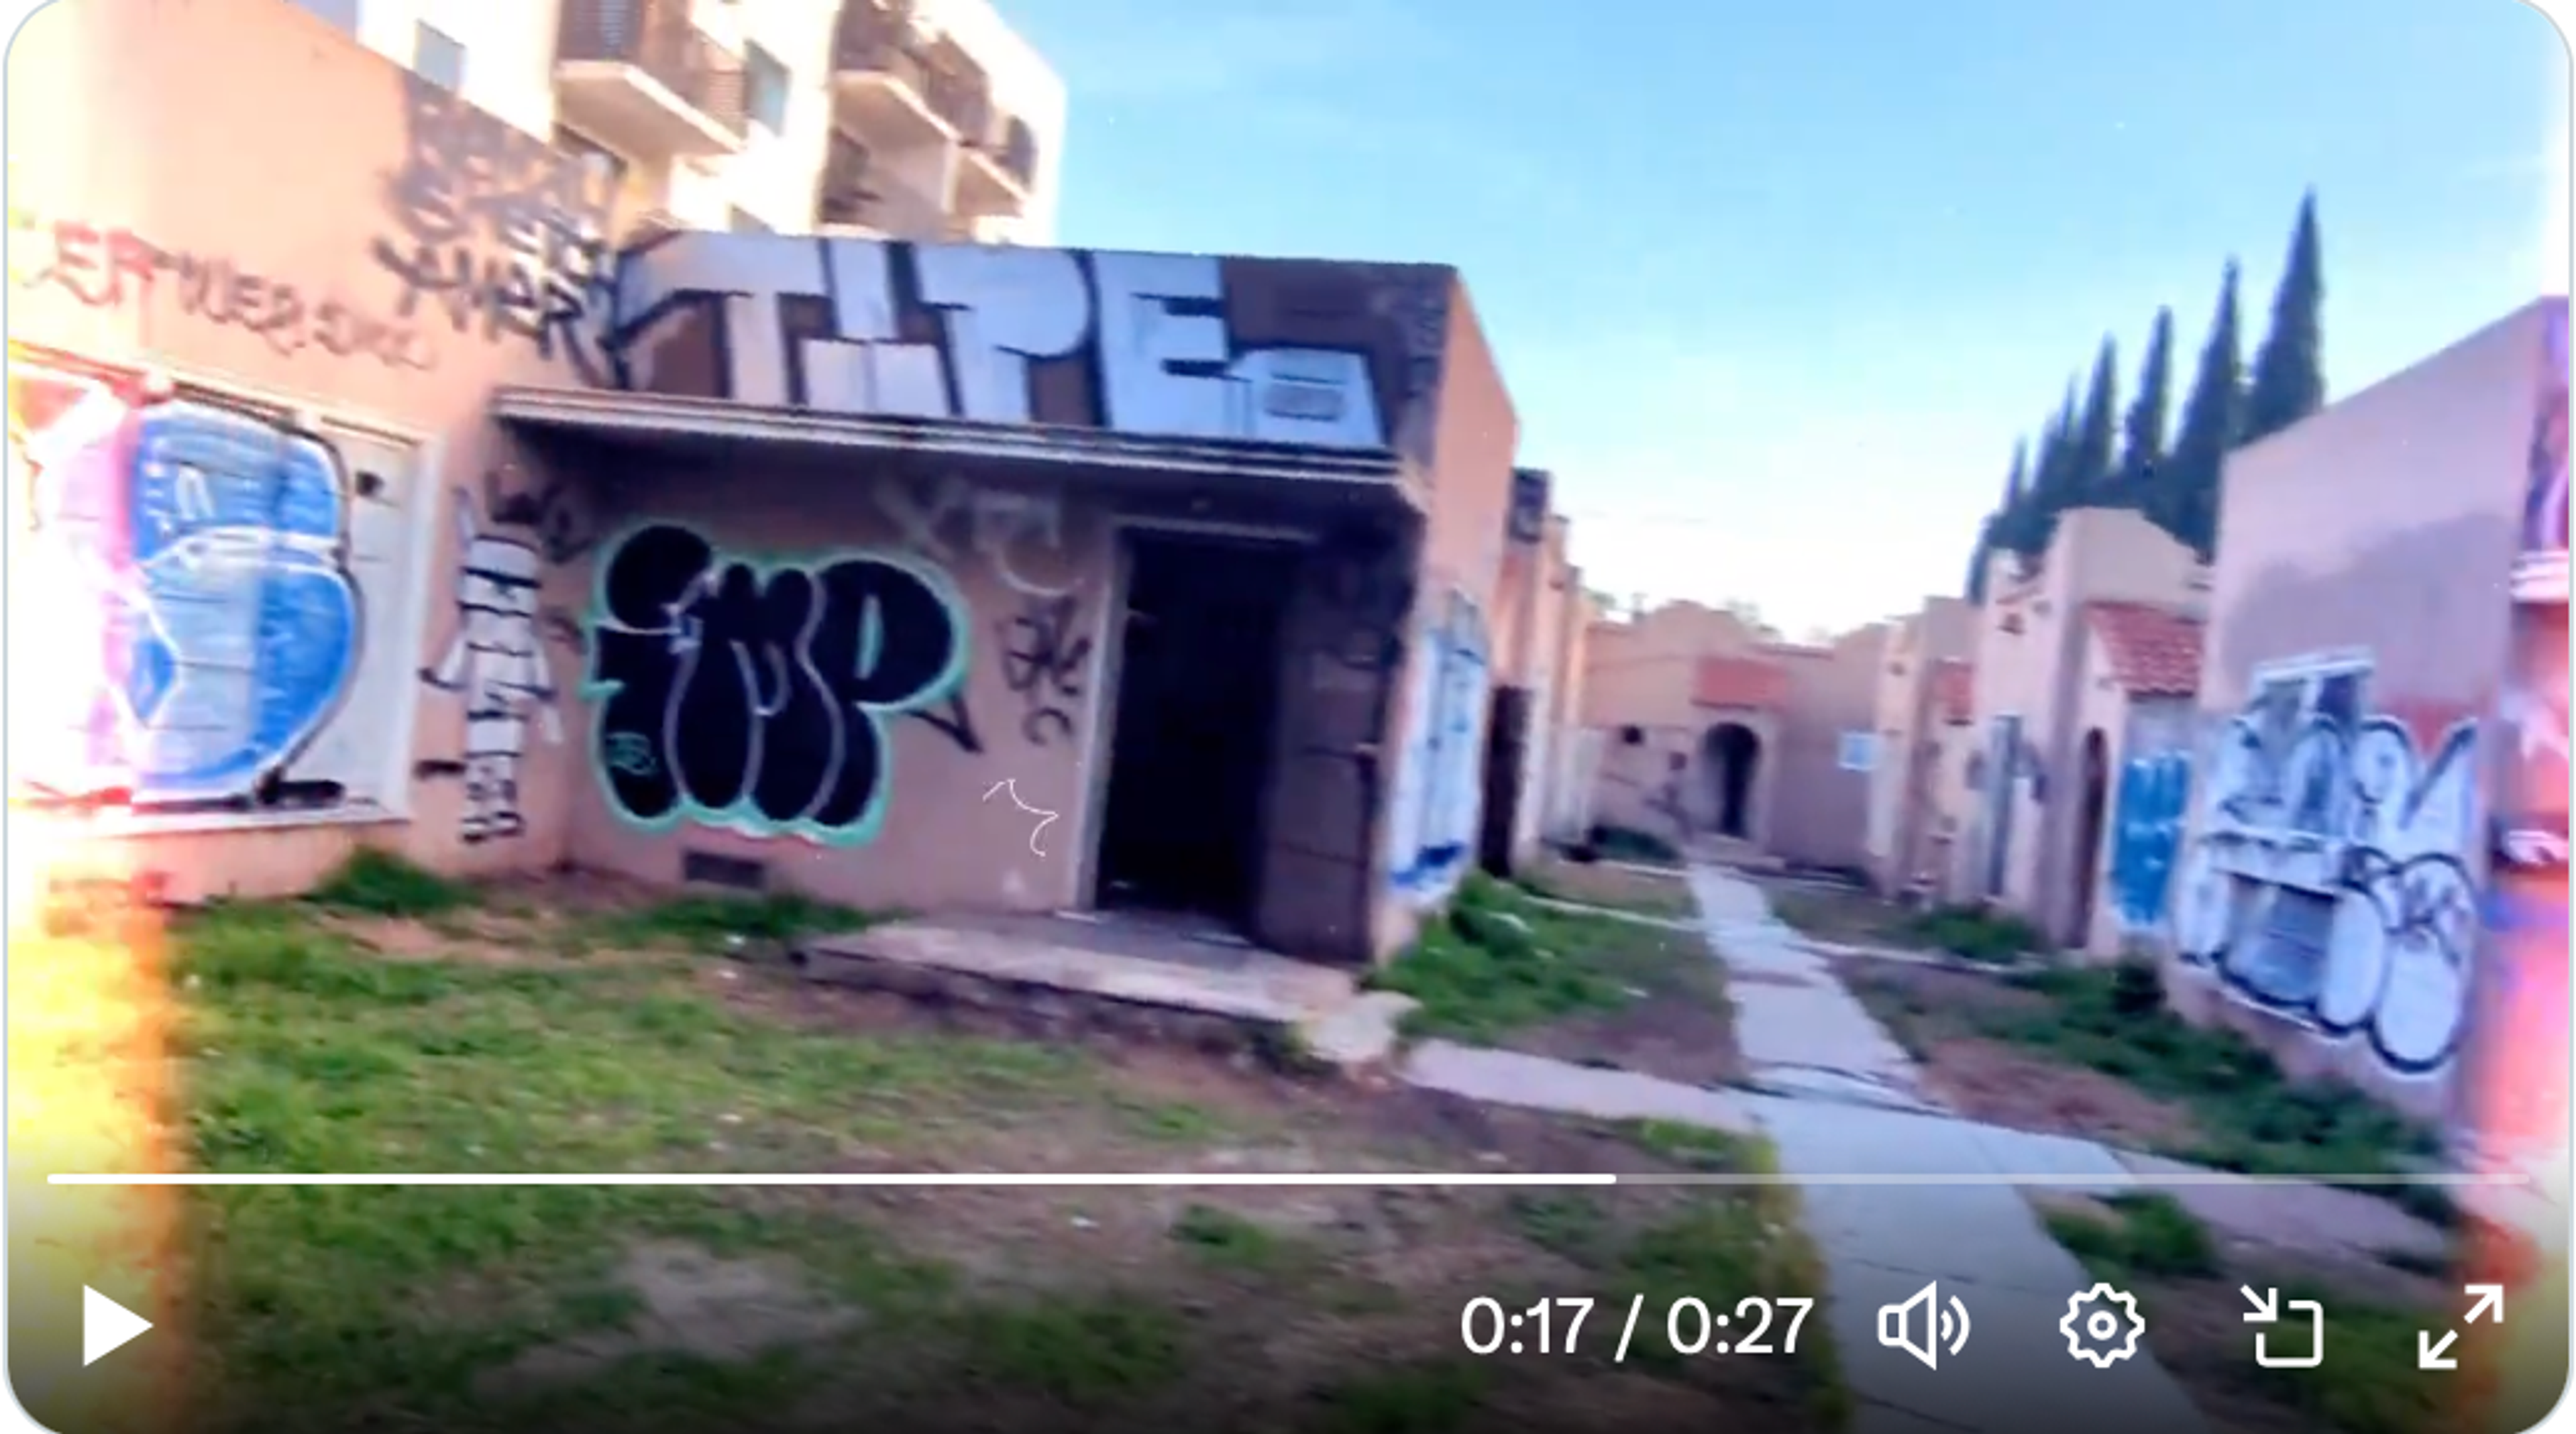 Screenshot of video clip showing the 7 heavily vandalized bungalow units at 5212 Melrose.